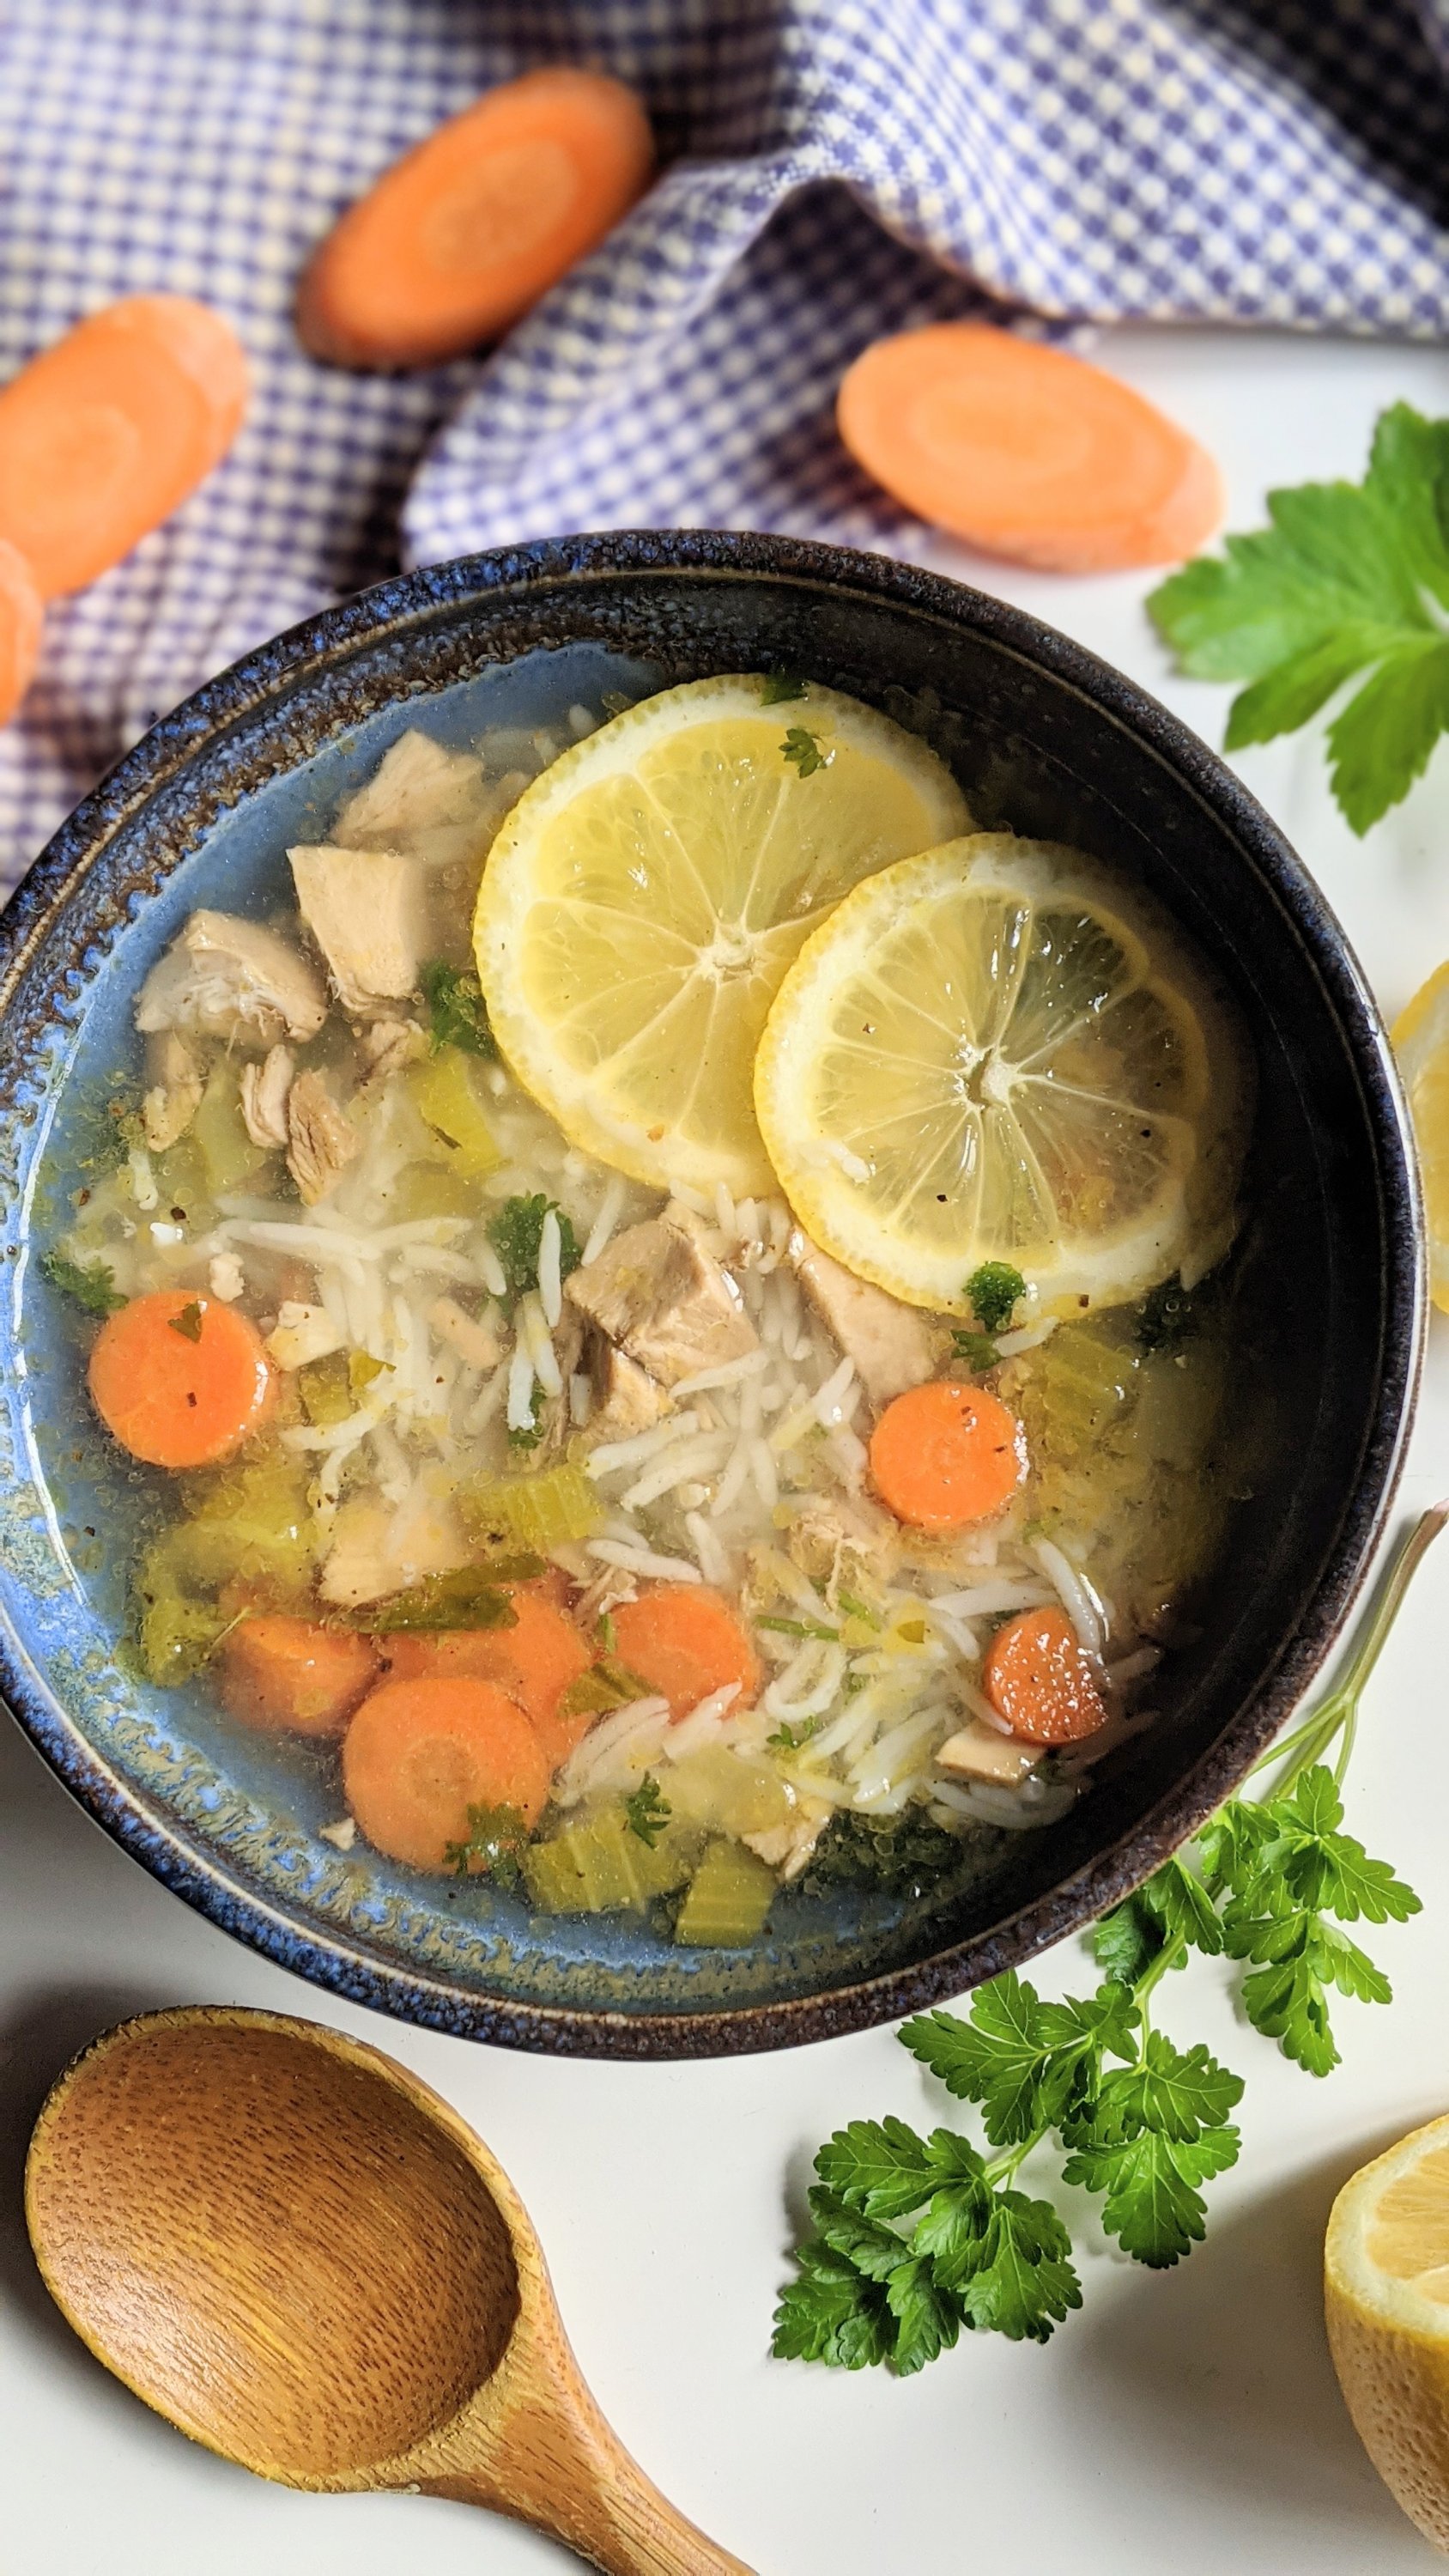 lemon and turkey soup recipe with rice healthy bright fresh turkey or chicken soup leftover rice gluten free soup recipes dairy free avgolemono soup no gluten